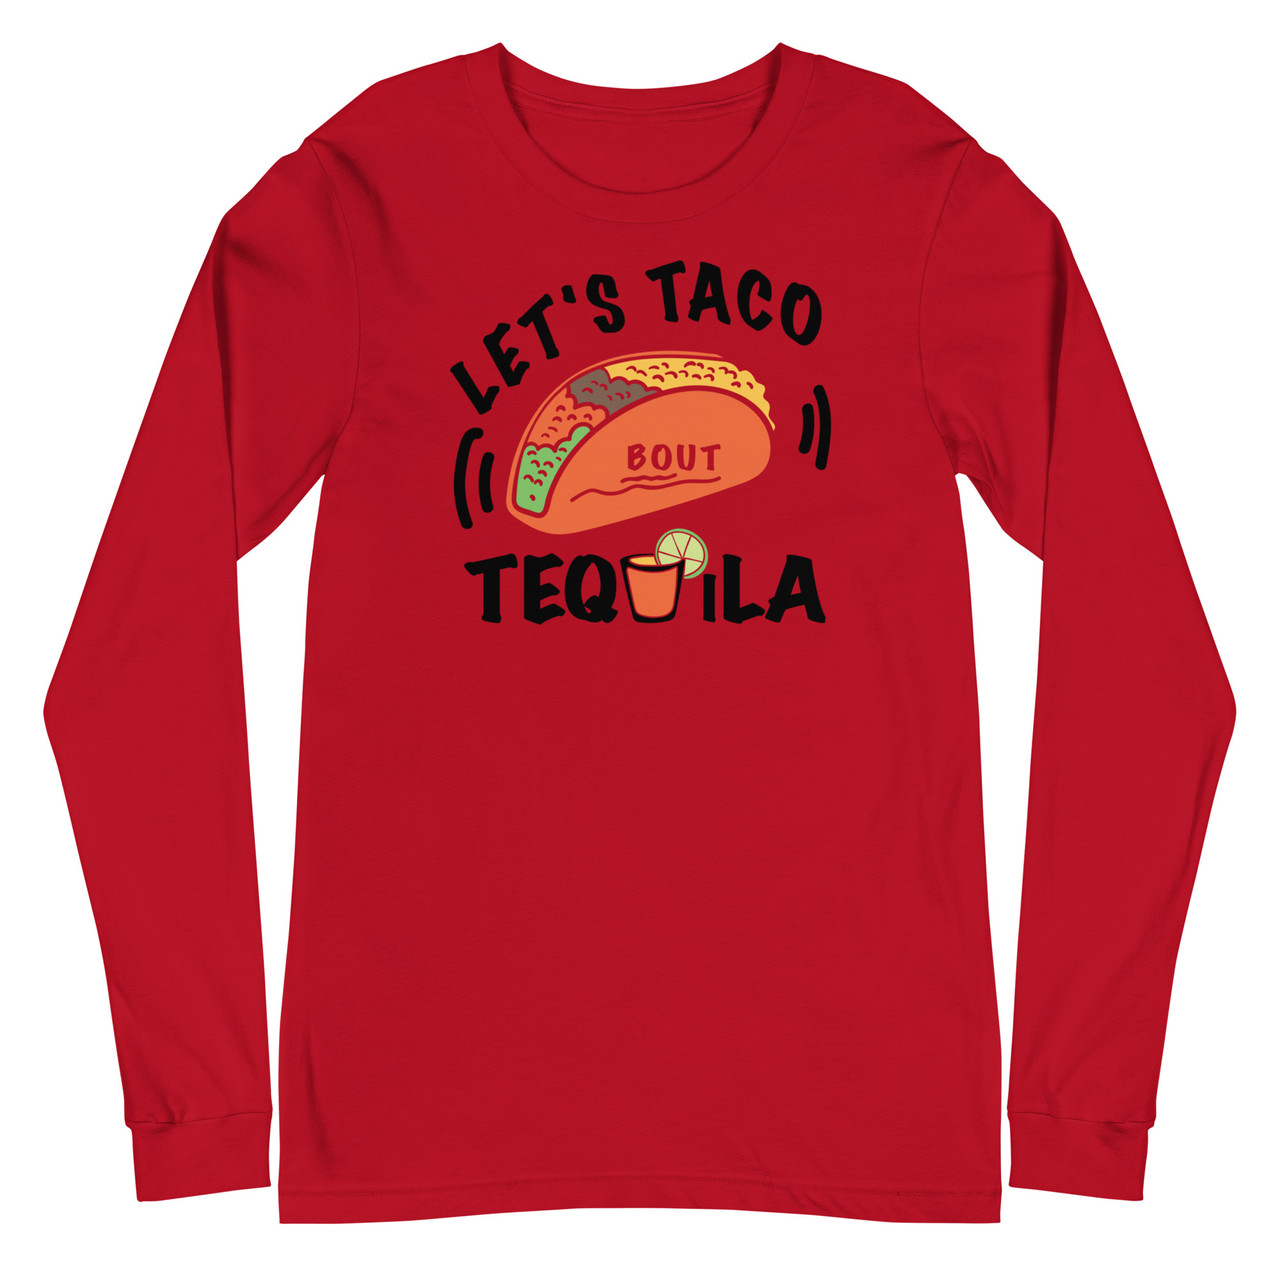 Let's Taco Bout Tequila  Unisex Long Sleeve Tee - Bella + Canvas 3501